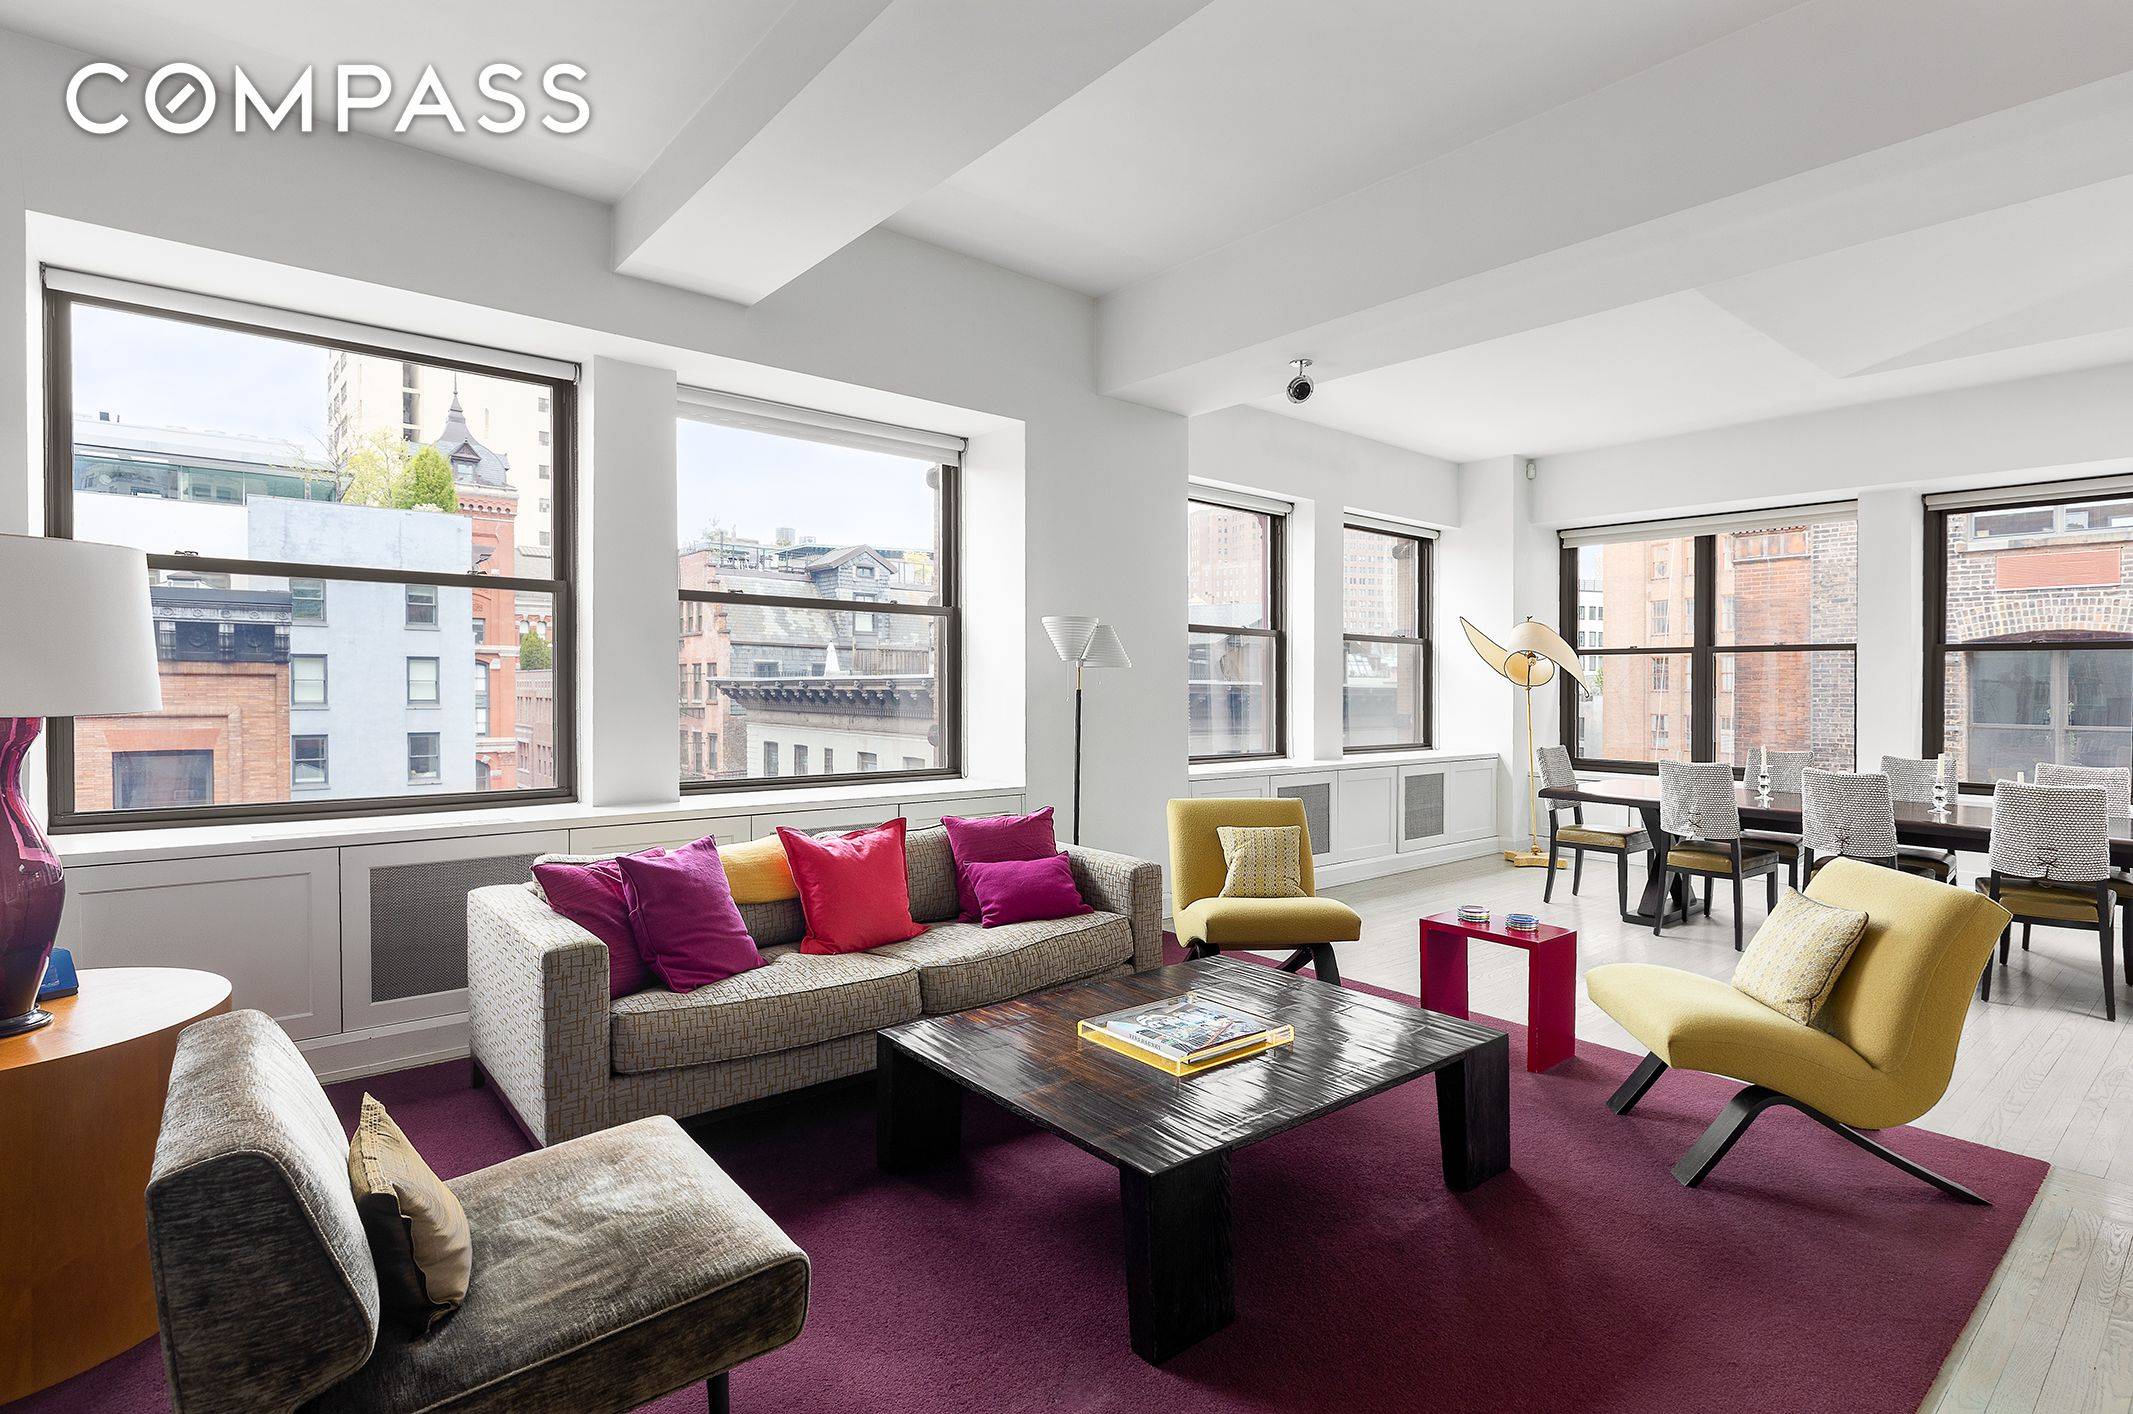 Situated on perhaps the best cobblestone block in Tribeca, 10 Jay Street is the quintessential prewar, loft style building offering privacy and quietude without sacrificing location.